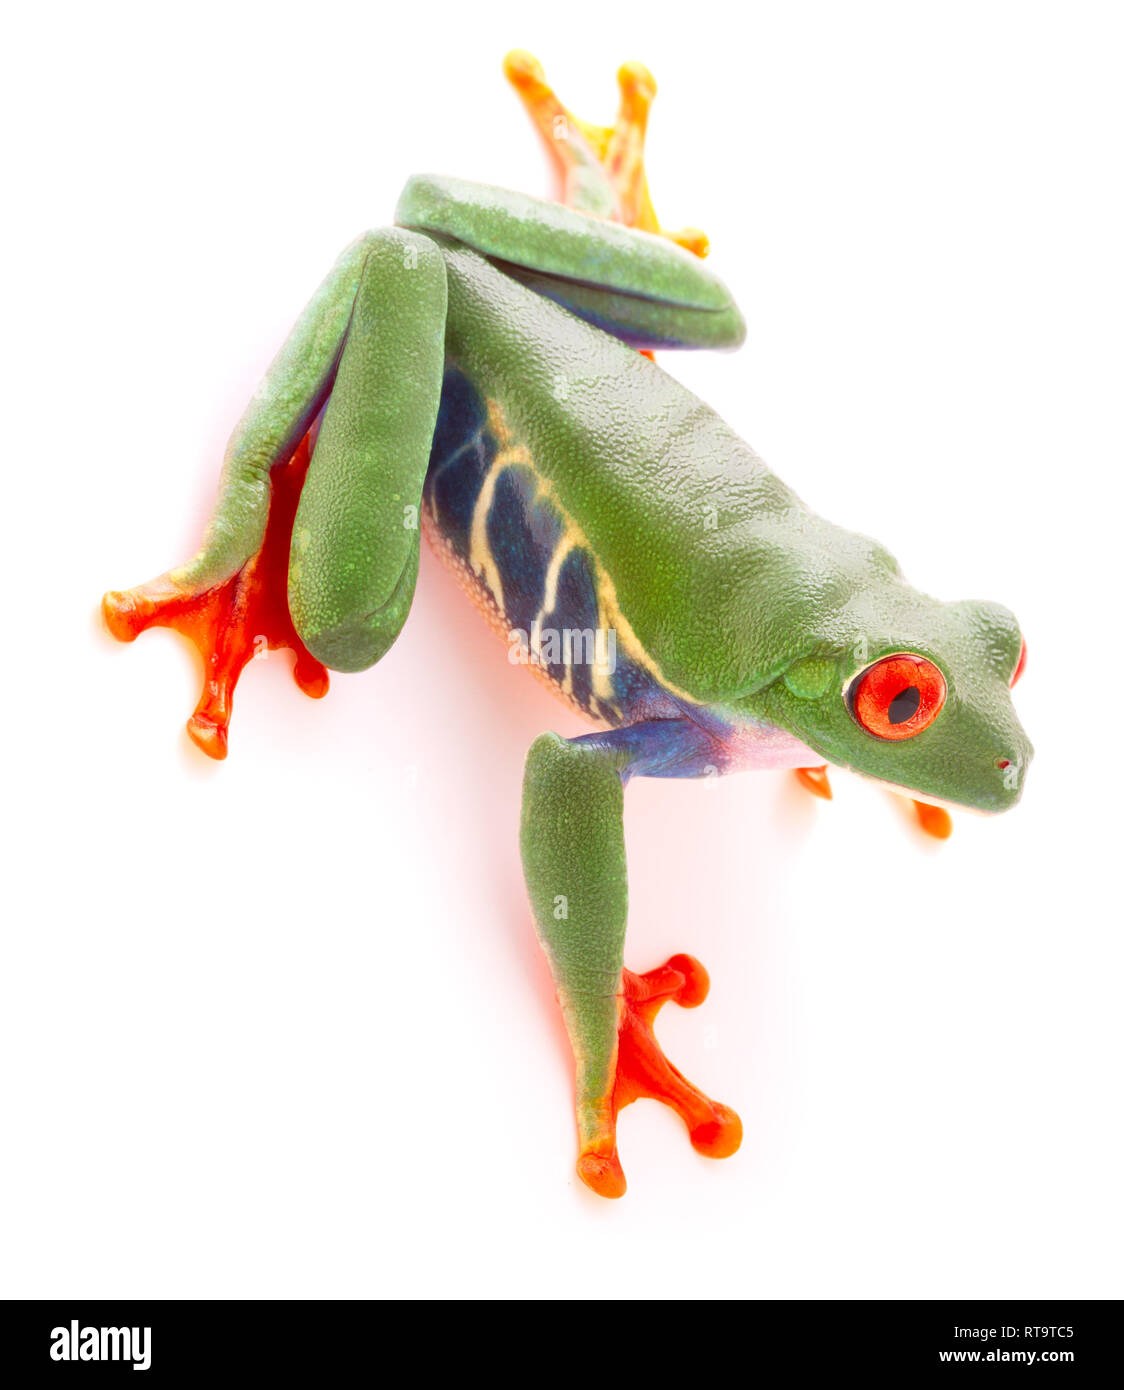 Red eyed tree frog from the tropical rain forest looking down. A cute funny exotic animal with vibrant eyes isolated on a white background. Stock Photo